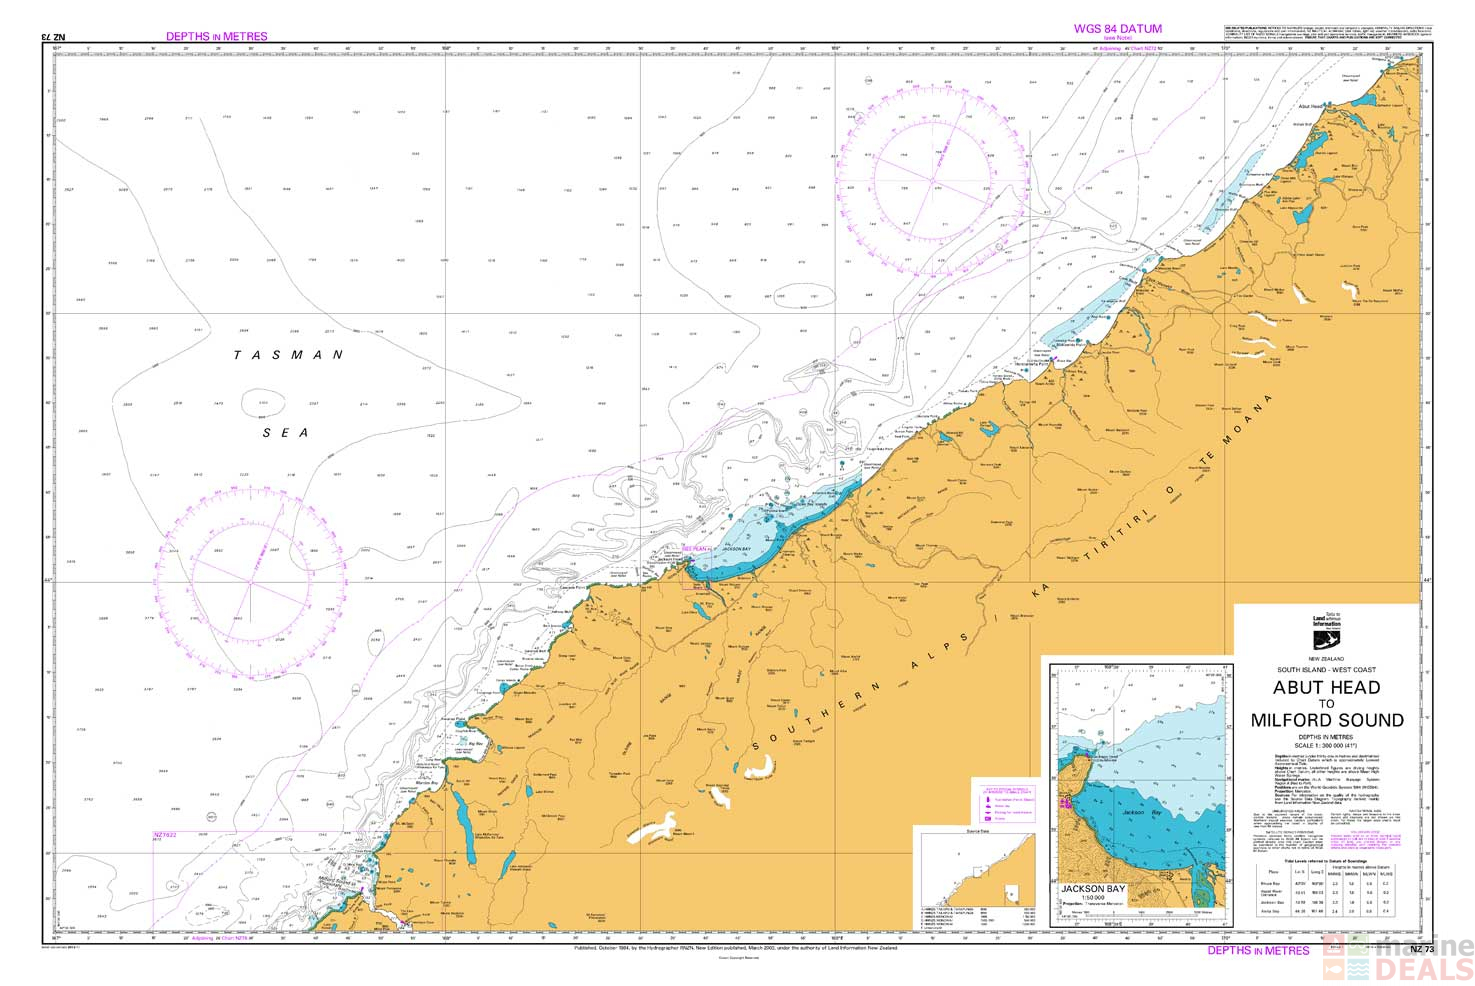 Buy NZ 73 Abut Head to Milford Sound - Jackson Bay Chart online at ...